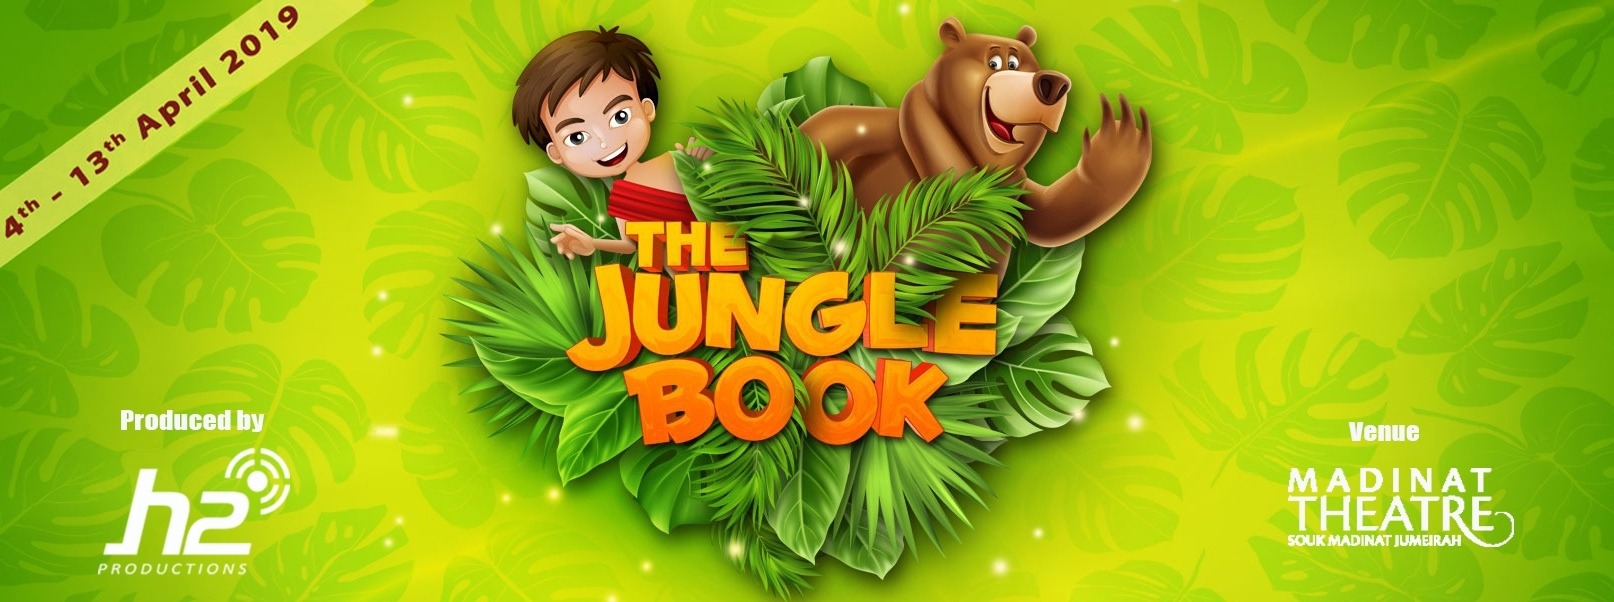 The Jungle Book at Madinat Theatre - Coming Soon in UAE